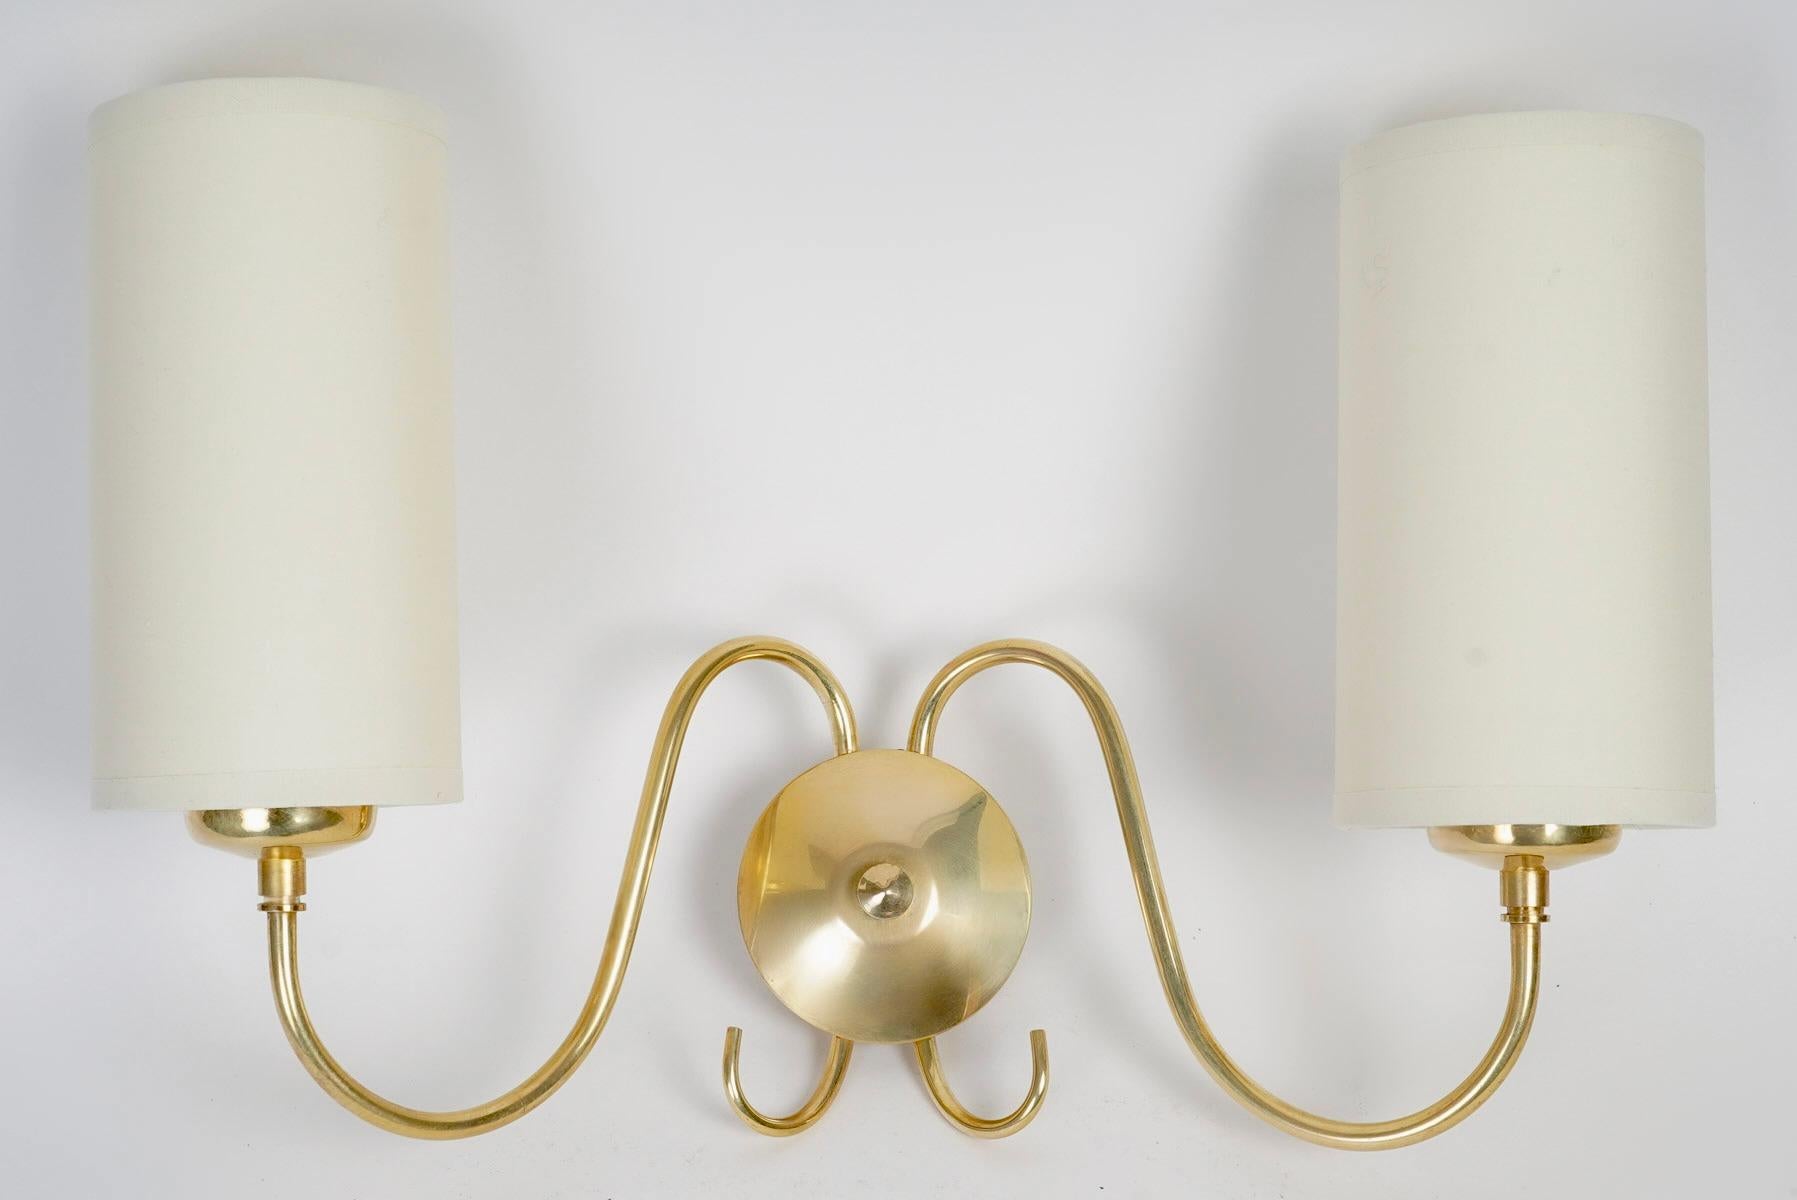 Composed of a round wall plate on which two upward-facing light arms are positioned on either side of the sconce, highlighted at the bottom by two gilded brass half-loops.
The two light arms are clad with cylindrical lampshades in off-white